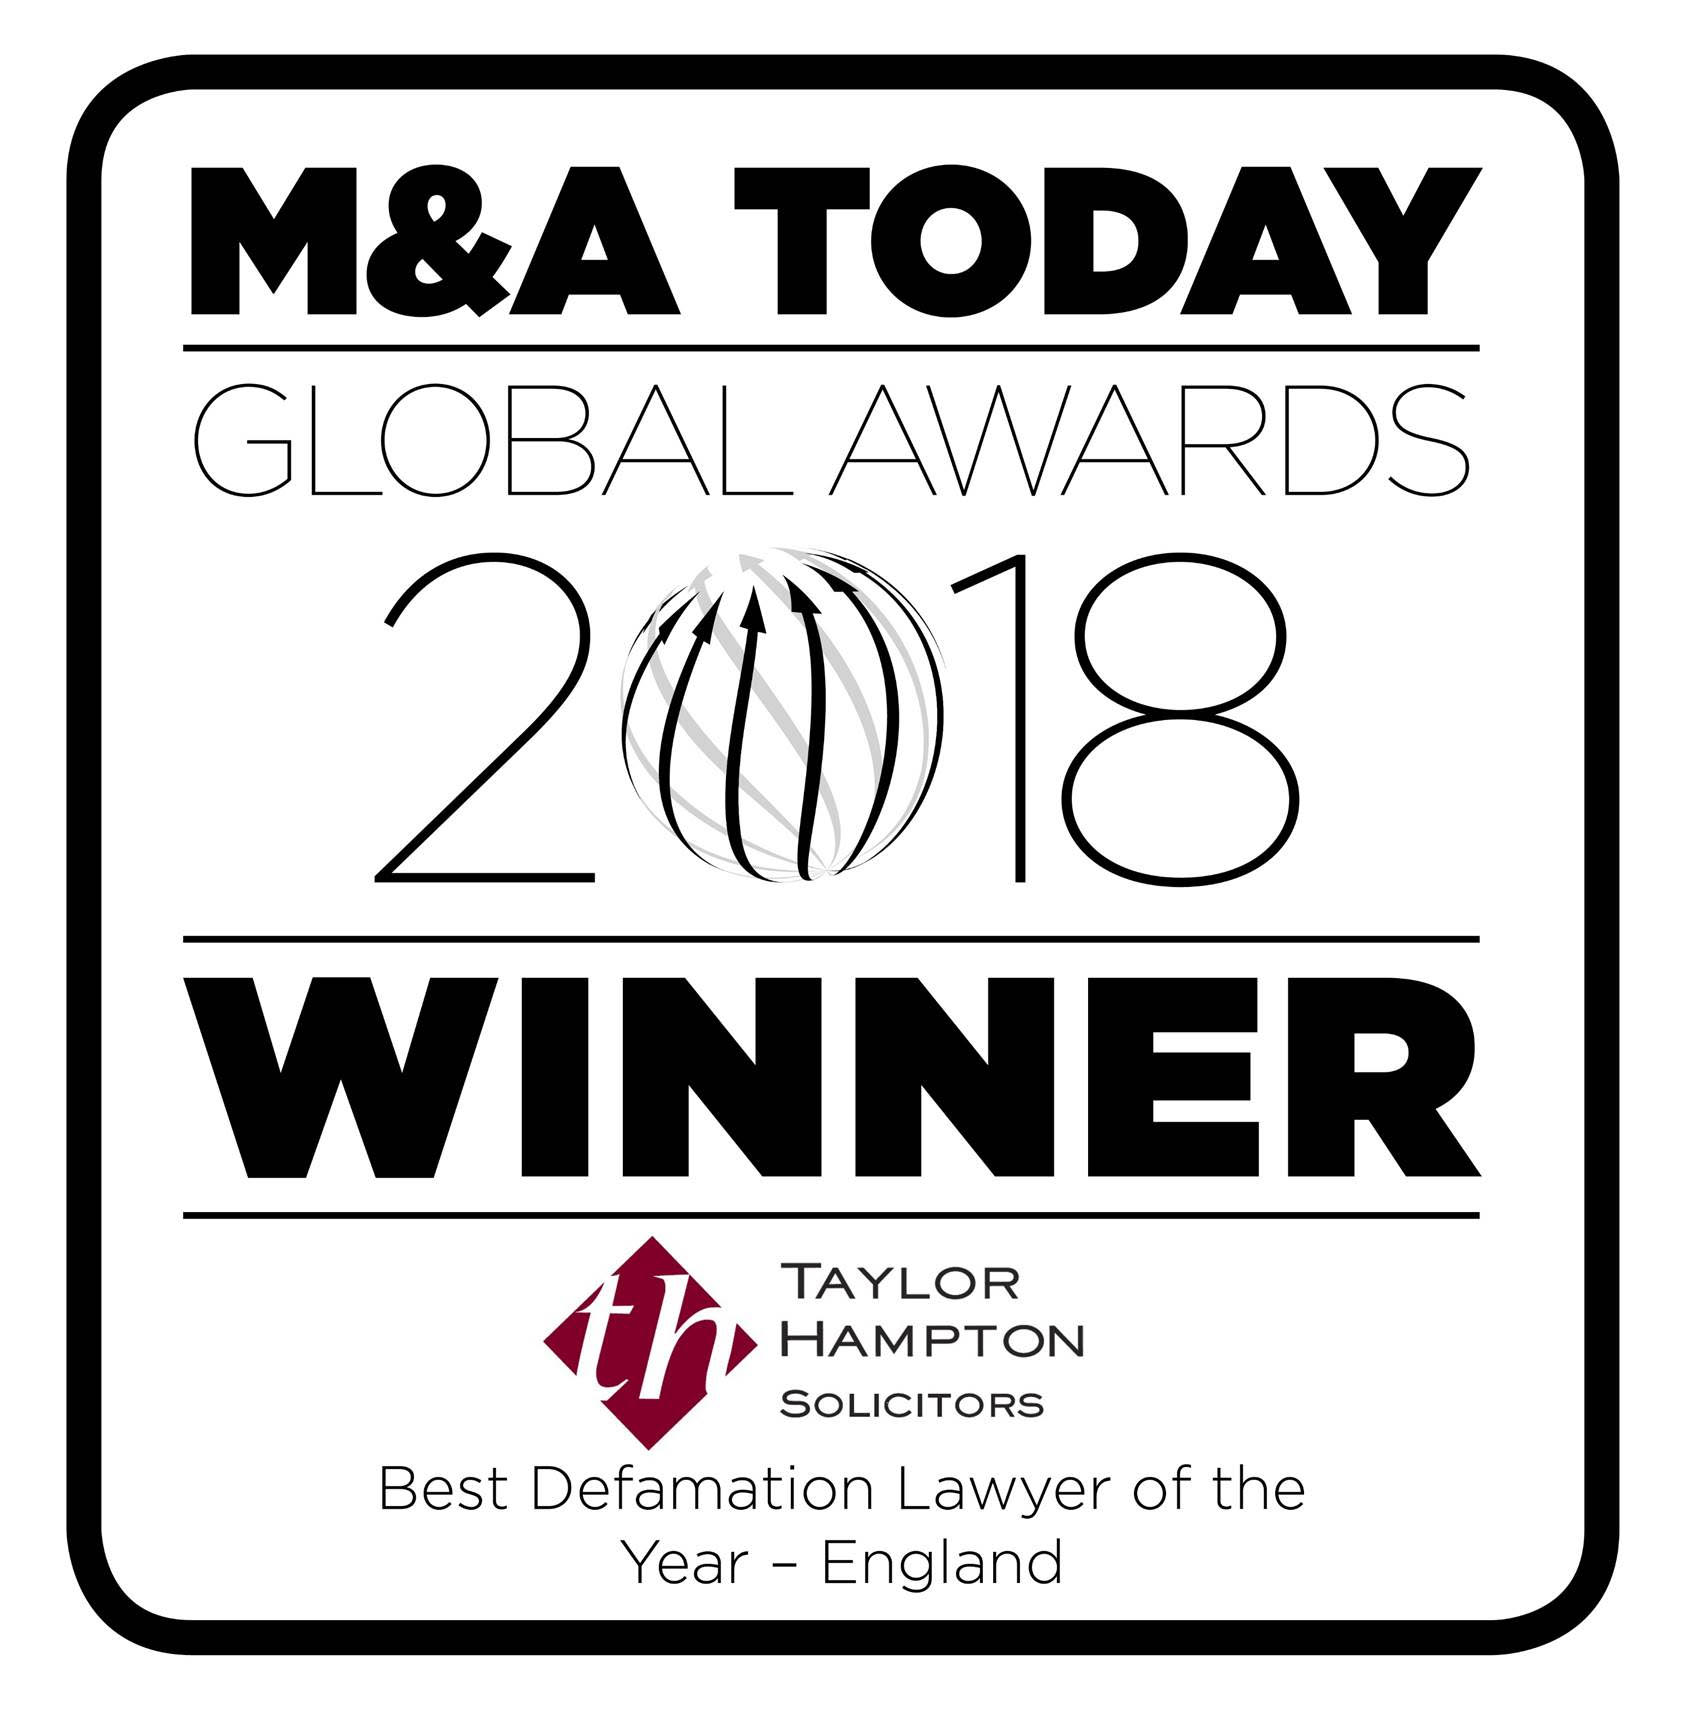 M&A Today Global Awards 2018 Winner - Taylor Hampton Solicitors - Best Defamation Lawyer of the Year - England